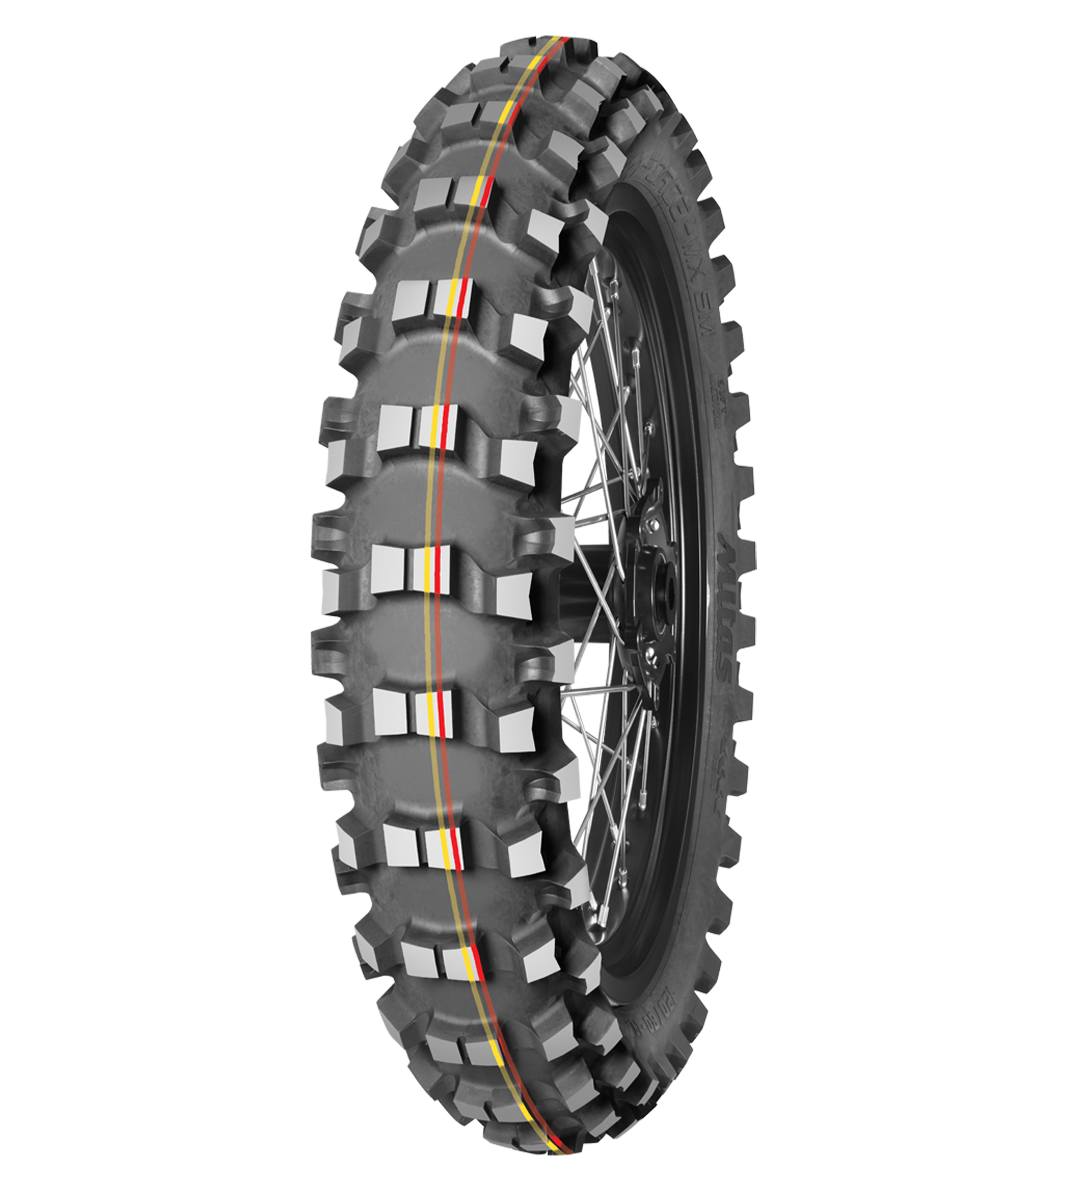 Mitas TERRA FORCE-MX SM 110/90-19 Motocross Competition Off-Road SOFT TO MEDIUM 62M Red &amp; Yellow Tube Rear Tire, 226606, 110/90-19, Motocross, Motocross Competition, Off-Road, Rear, Terra Force, Terra Force-MX SM, Trail, Tires - Imported and distributed in North &amp; South America by Lindeco Genuine Powersports - Premier Powersports Equipment and Accessories for Motorcycle Enthusiasts, Professional Riders and Dealers.